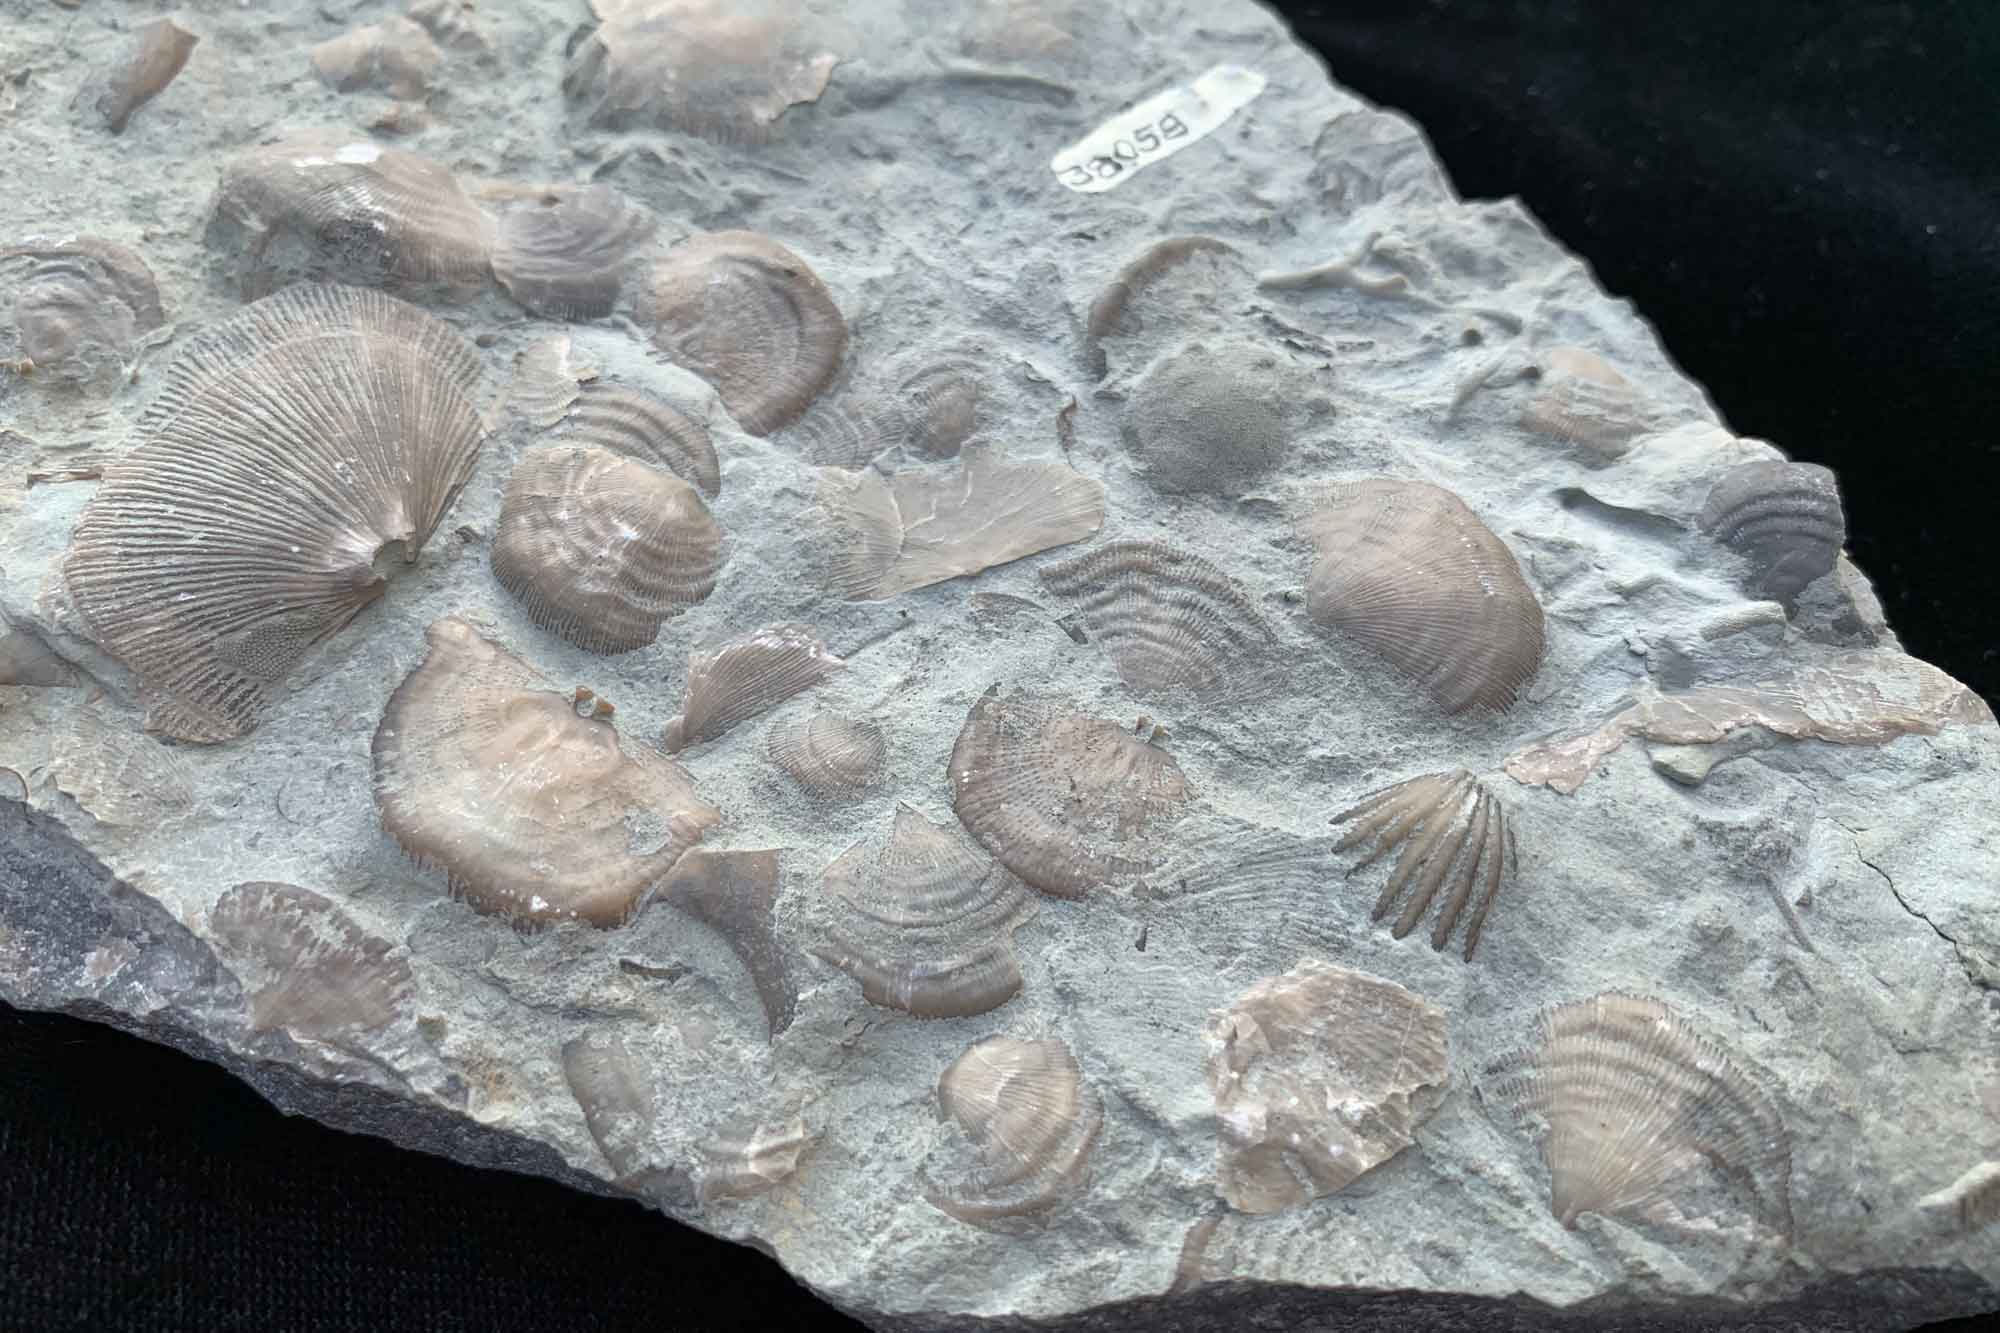 Photograph of a sample of Ordovician-aged limestone that is covered with brachiopod fossils.